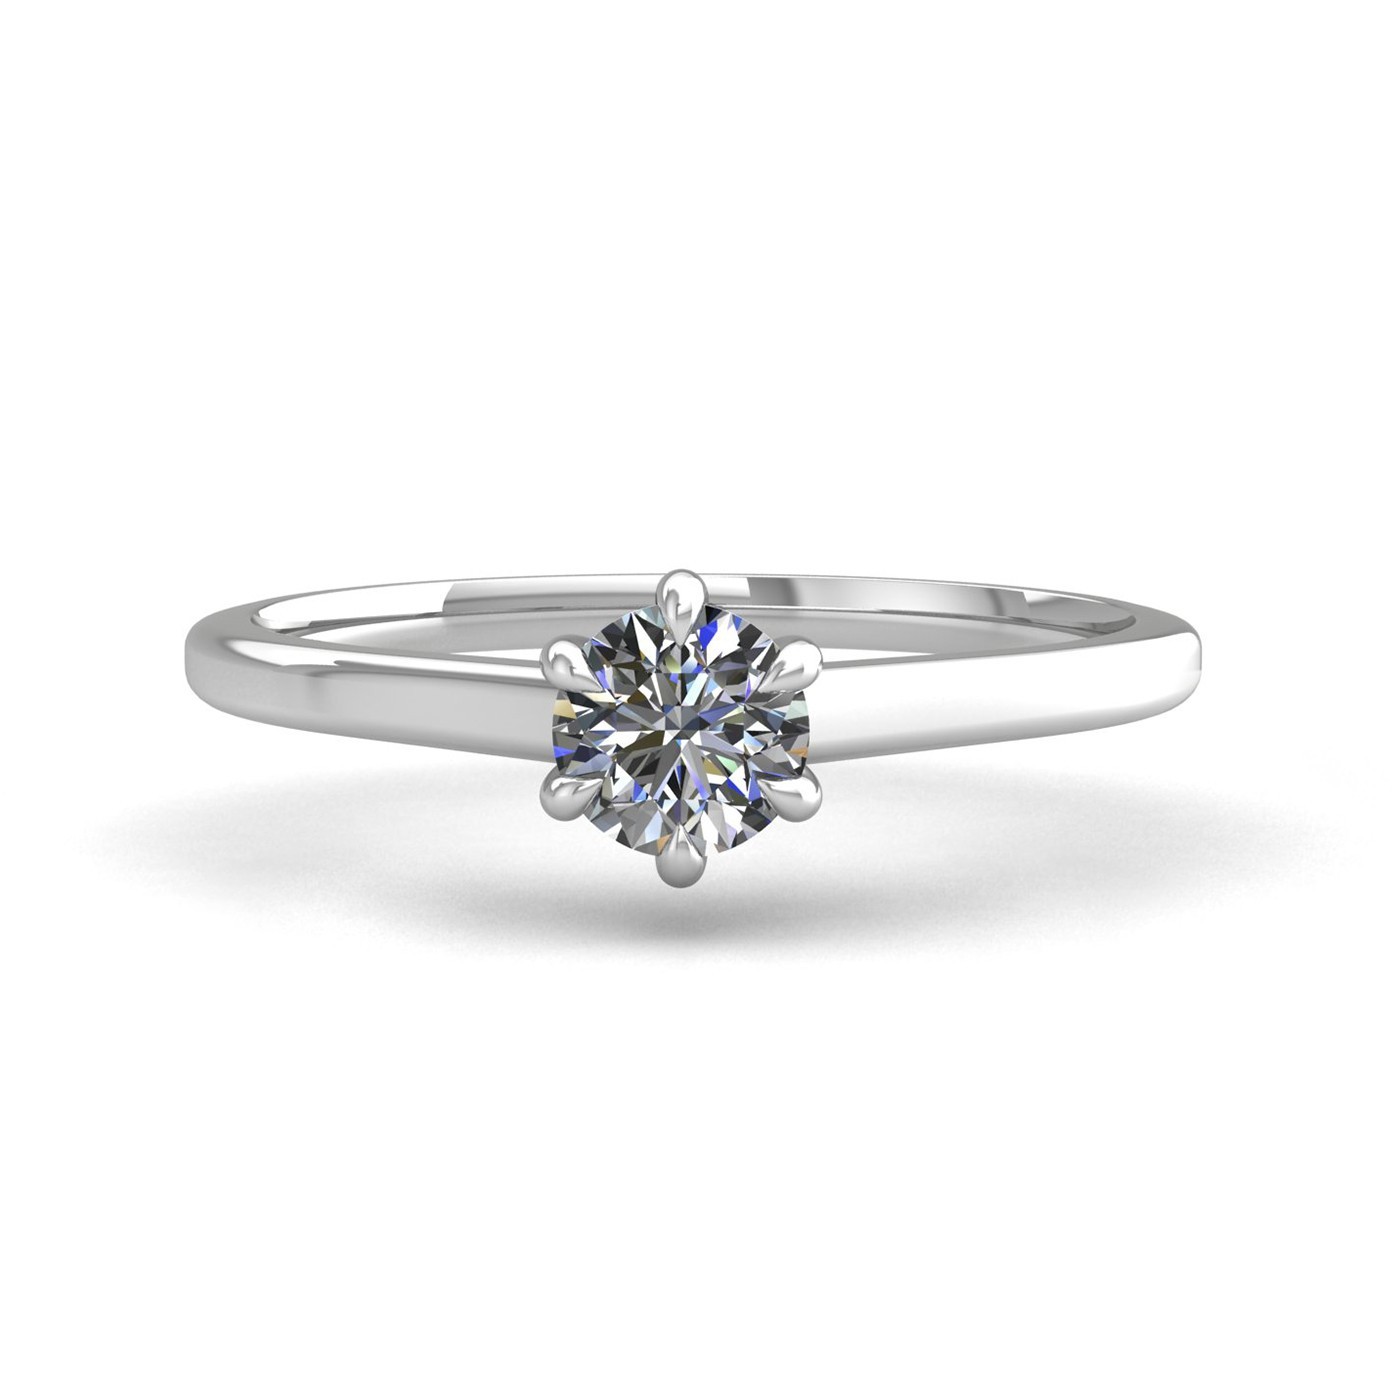 18k white gold 1,20 ct 6 prongs solitaire round cut diamond engagement ring with whisper thin band Photos & images